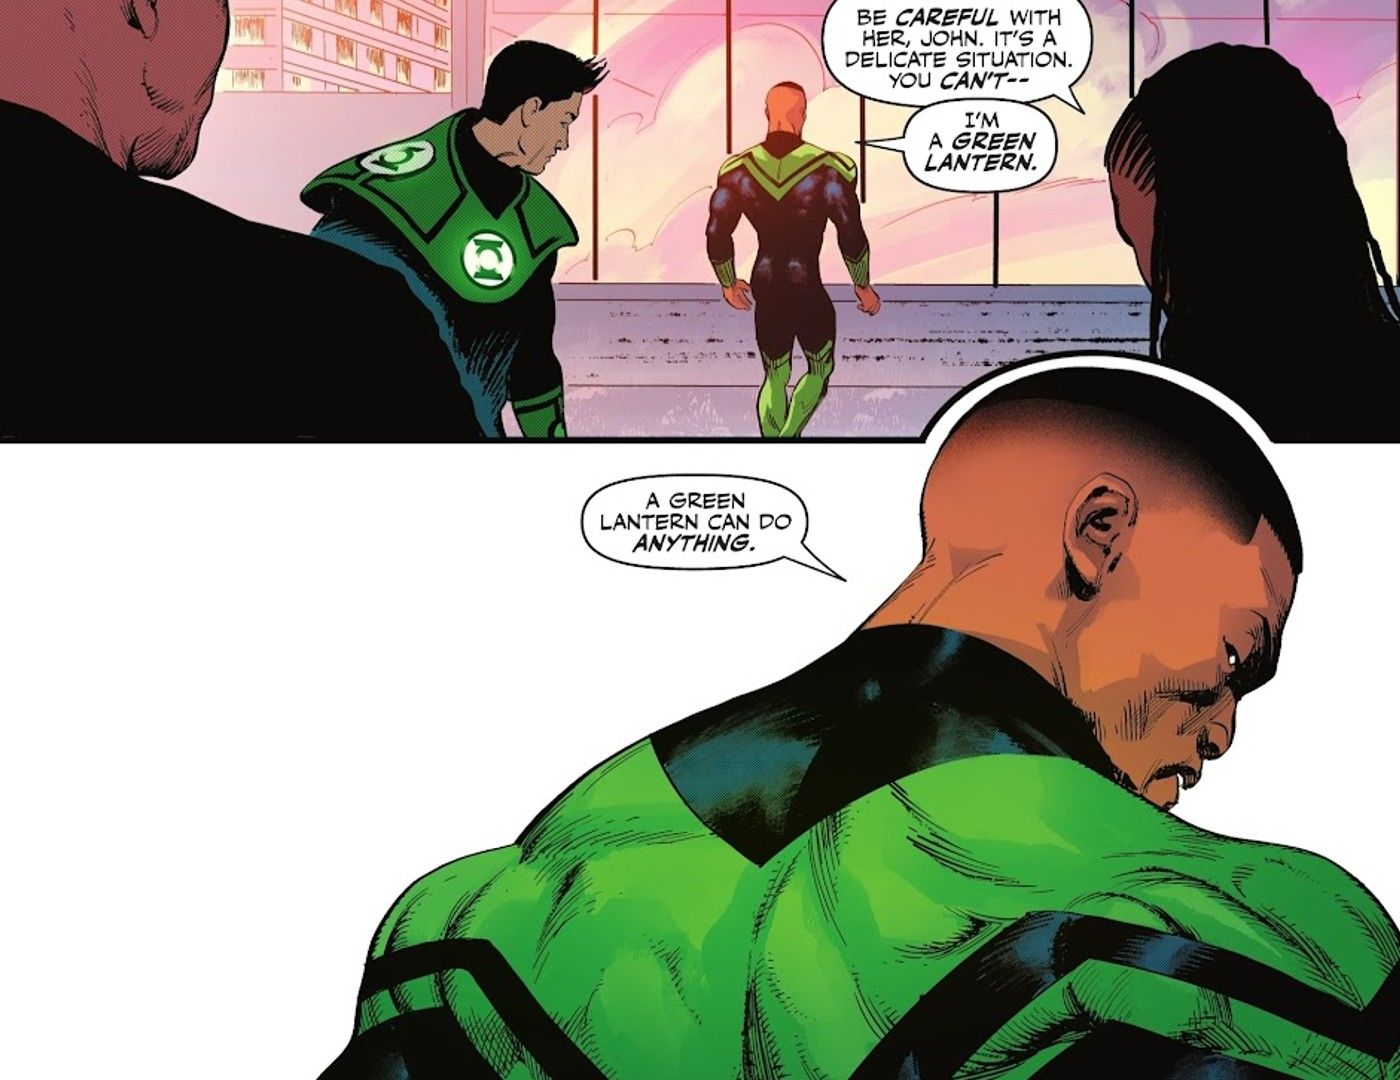 “A Green Lantern Can Do Anything”: Green Lantern’s God-Like Status Takes a Dark Turn Thanks to His Ultimate Power